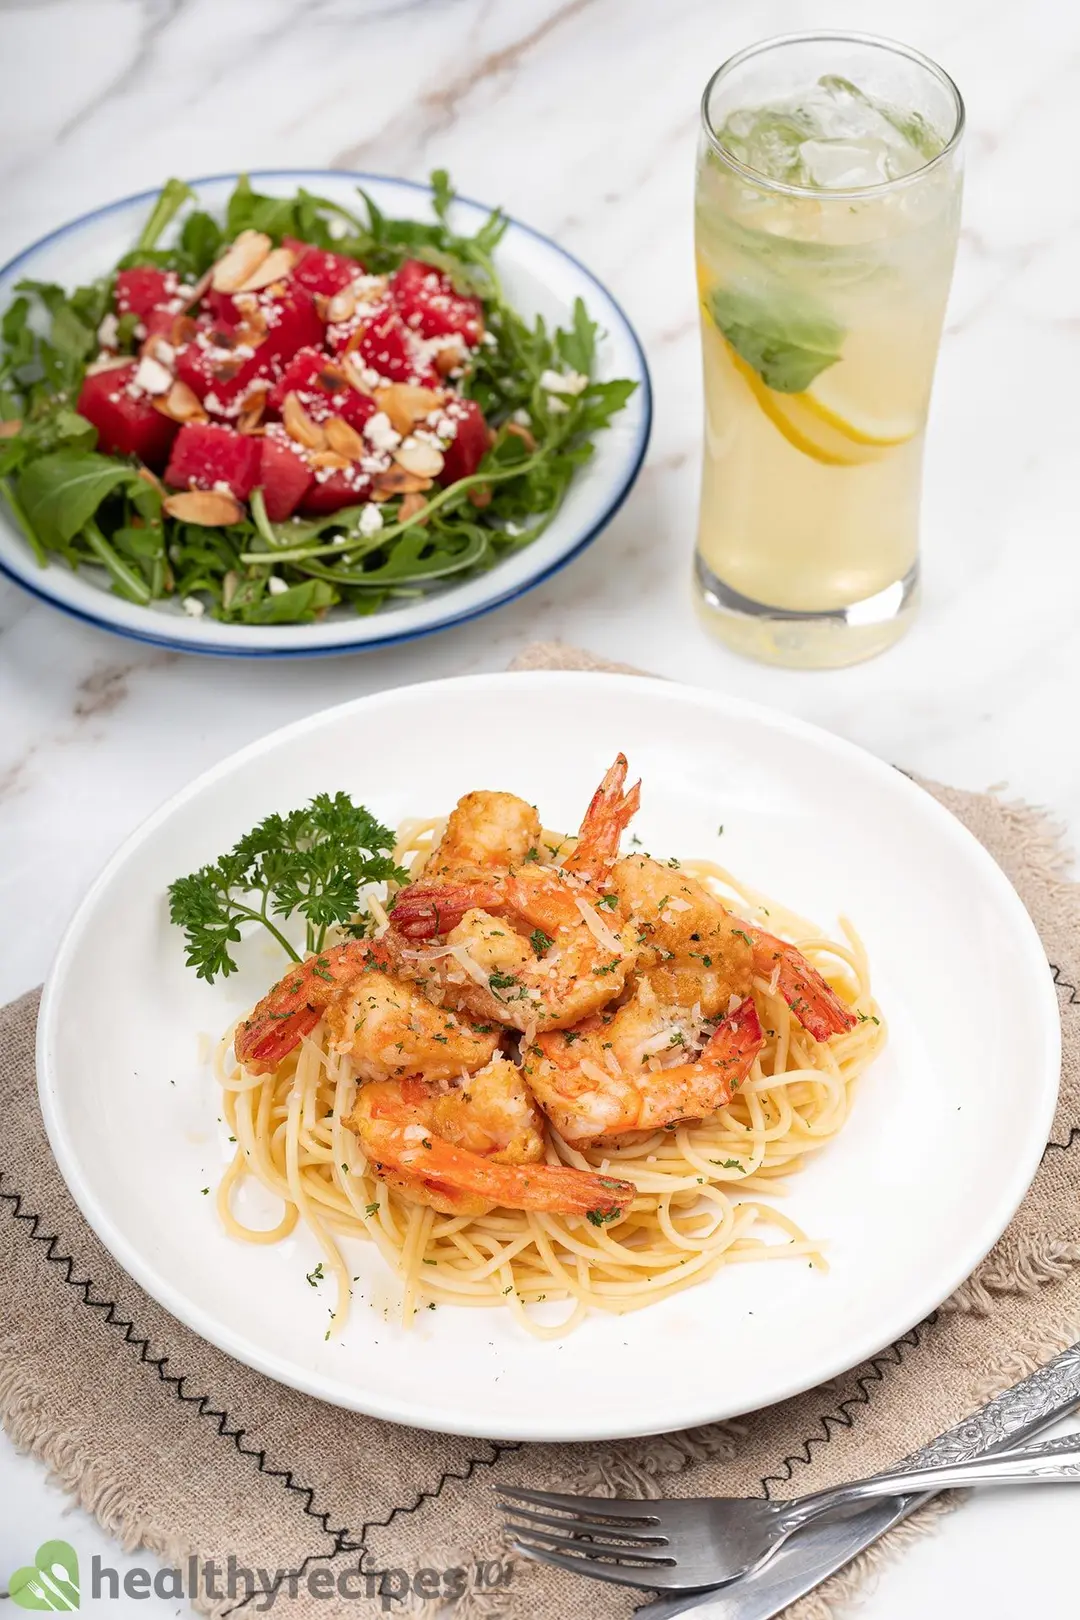 What to Serve with Shrimp Francese